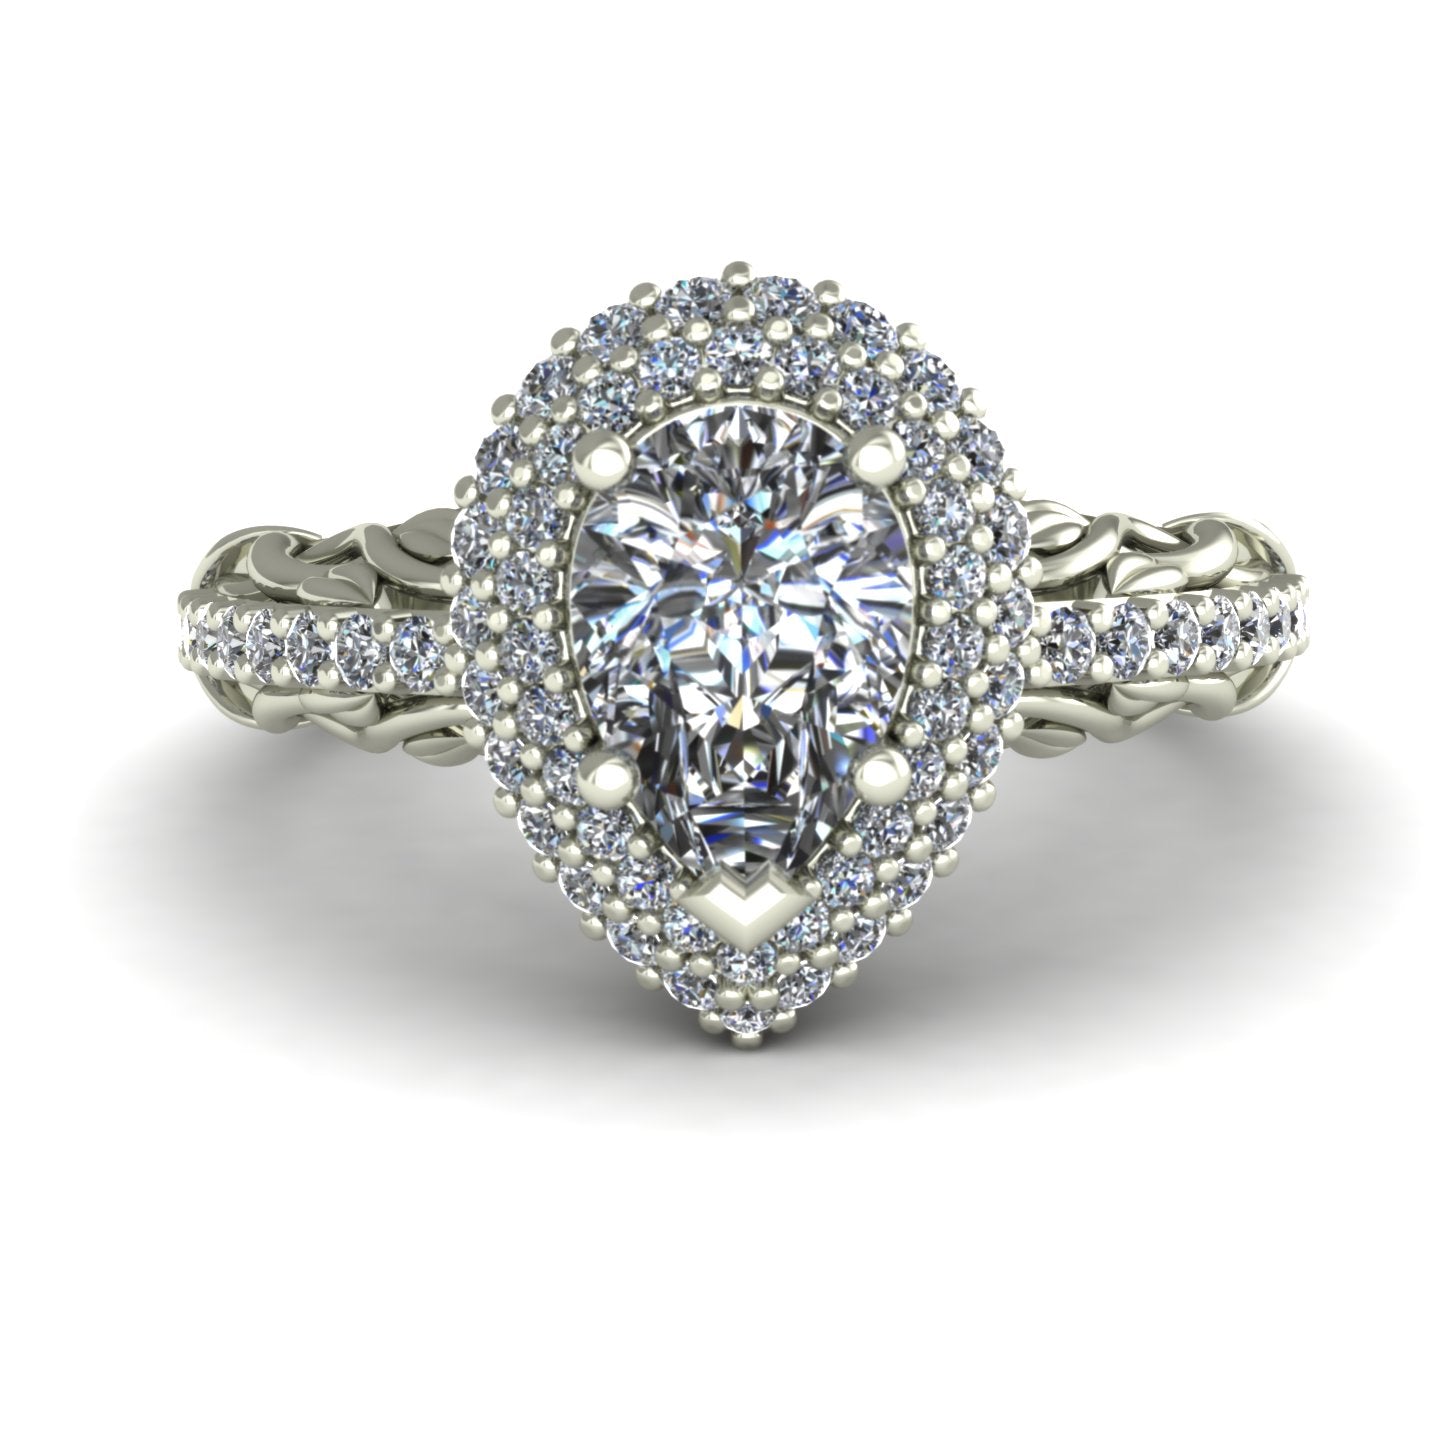 pear cut diamond double halo engagement ring with leaves and vines in 14k white gold - Charles Babb Designs - top view